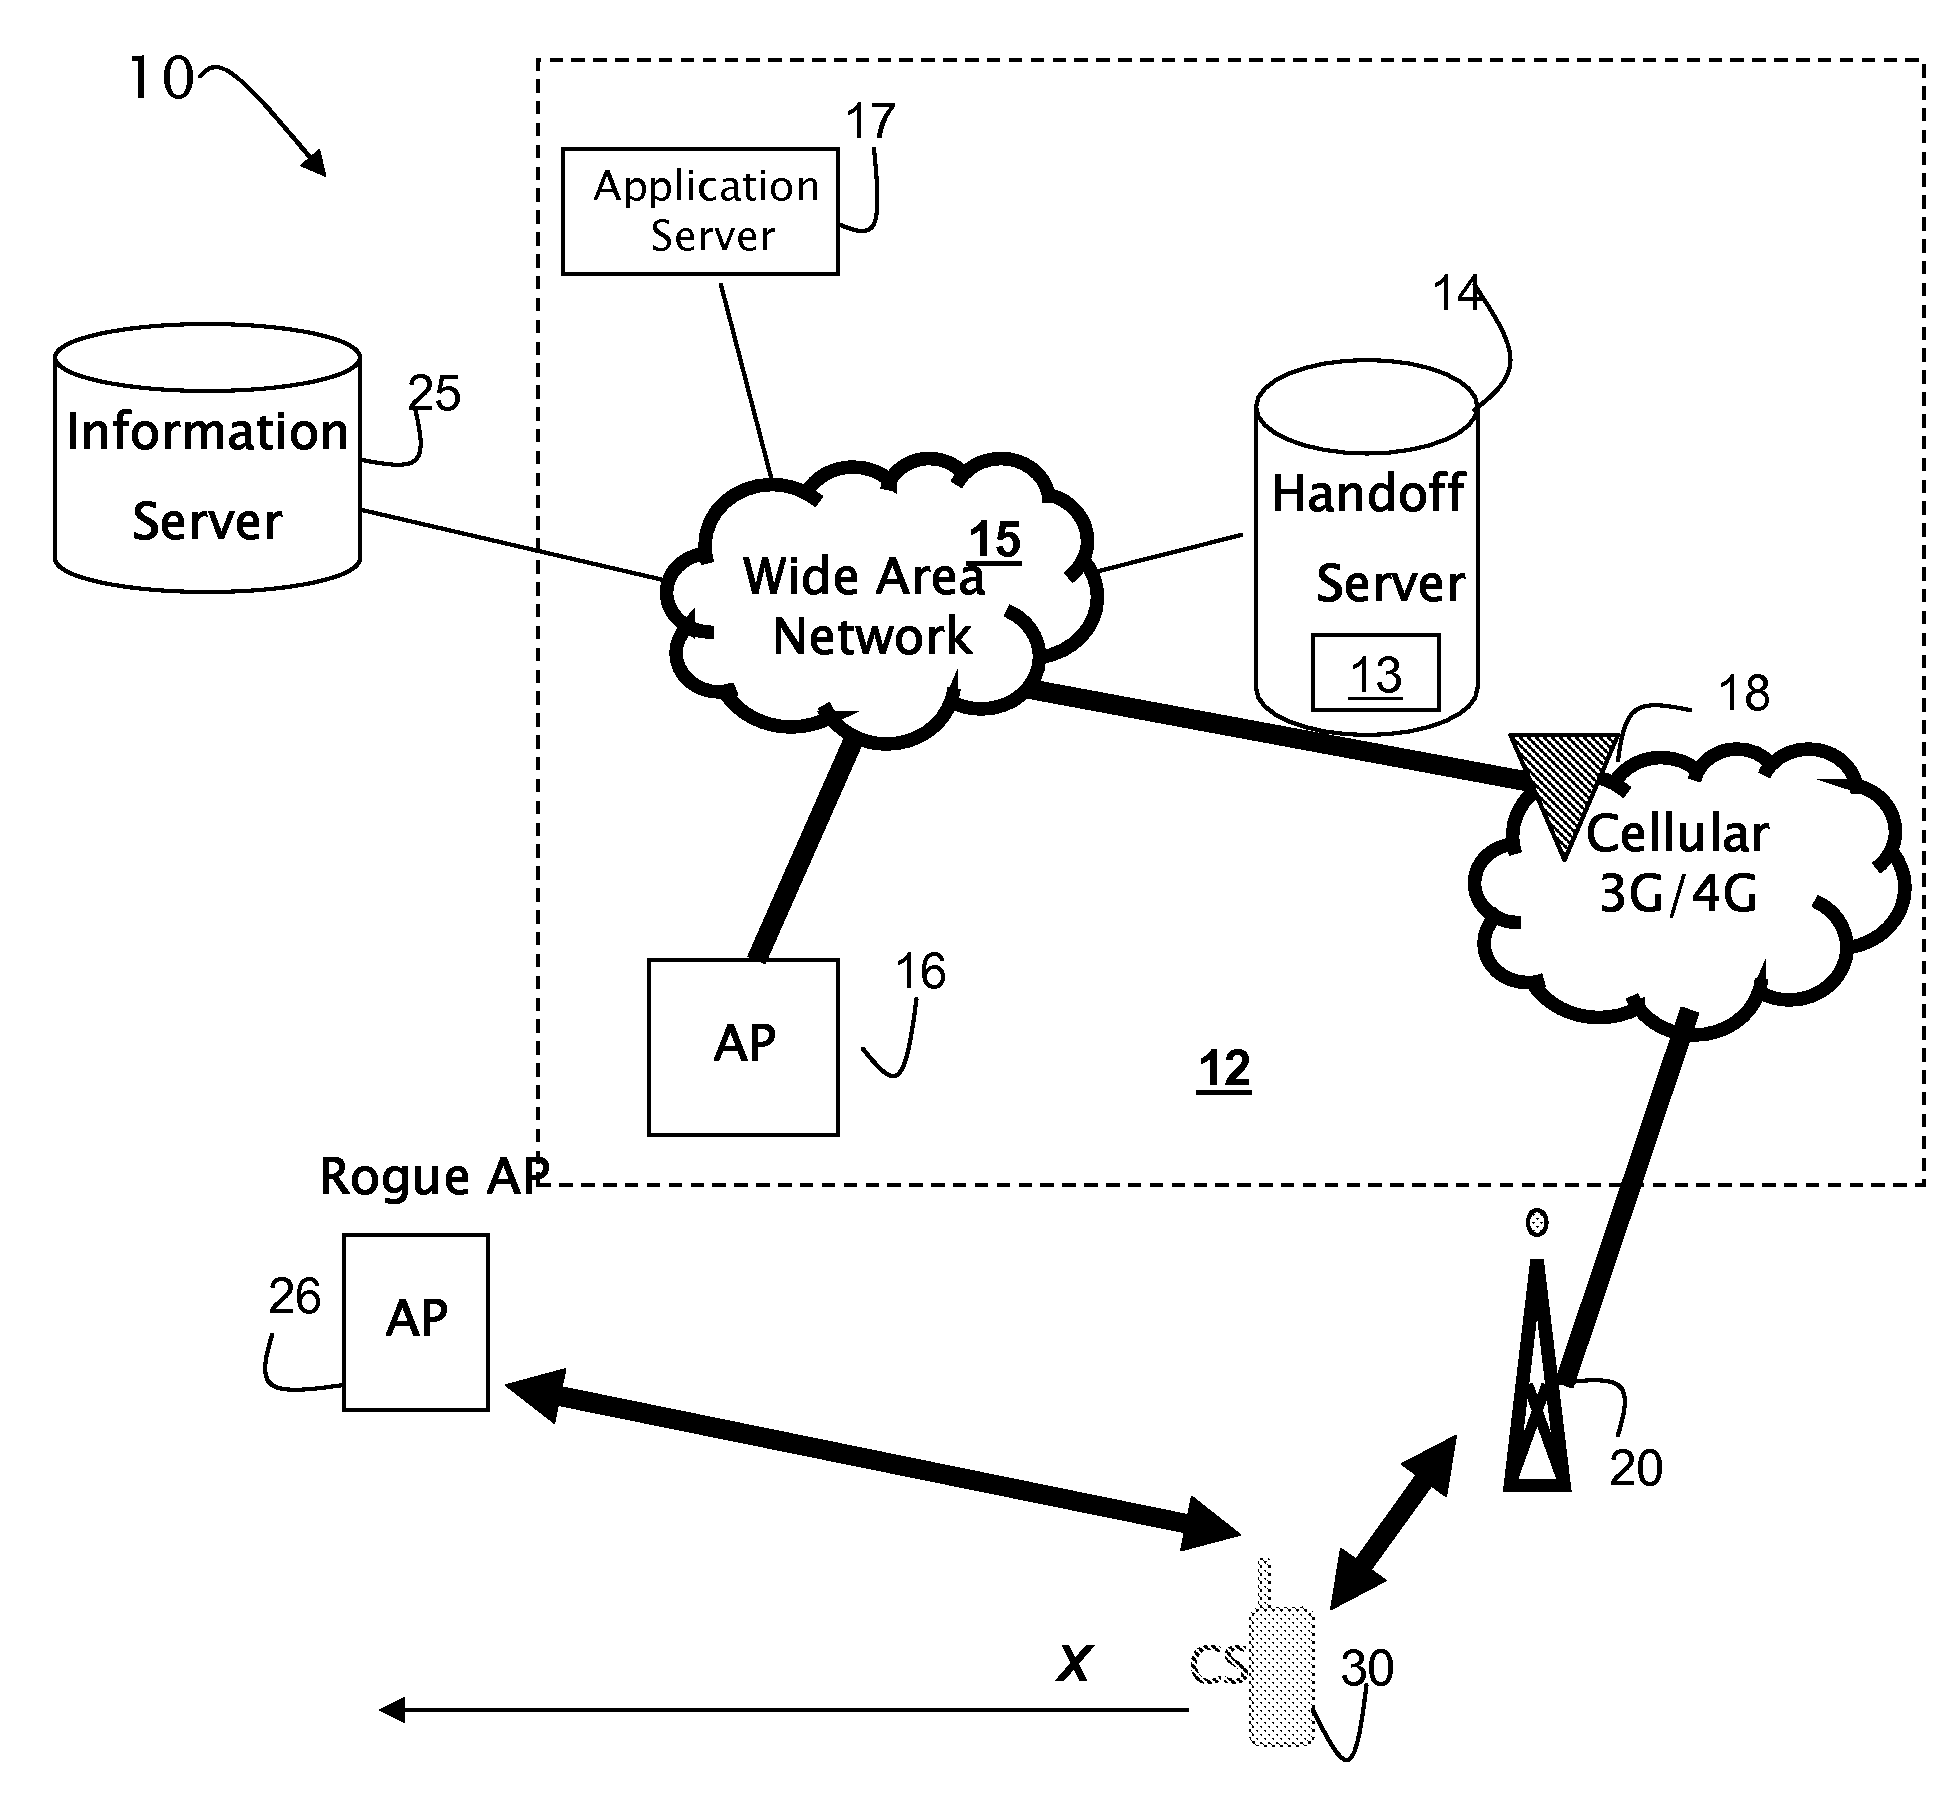 Method and apparatus for security configuration and verification of wireless devices in a fixed/mobile convergence environment